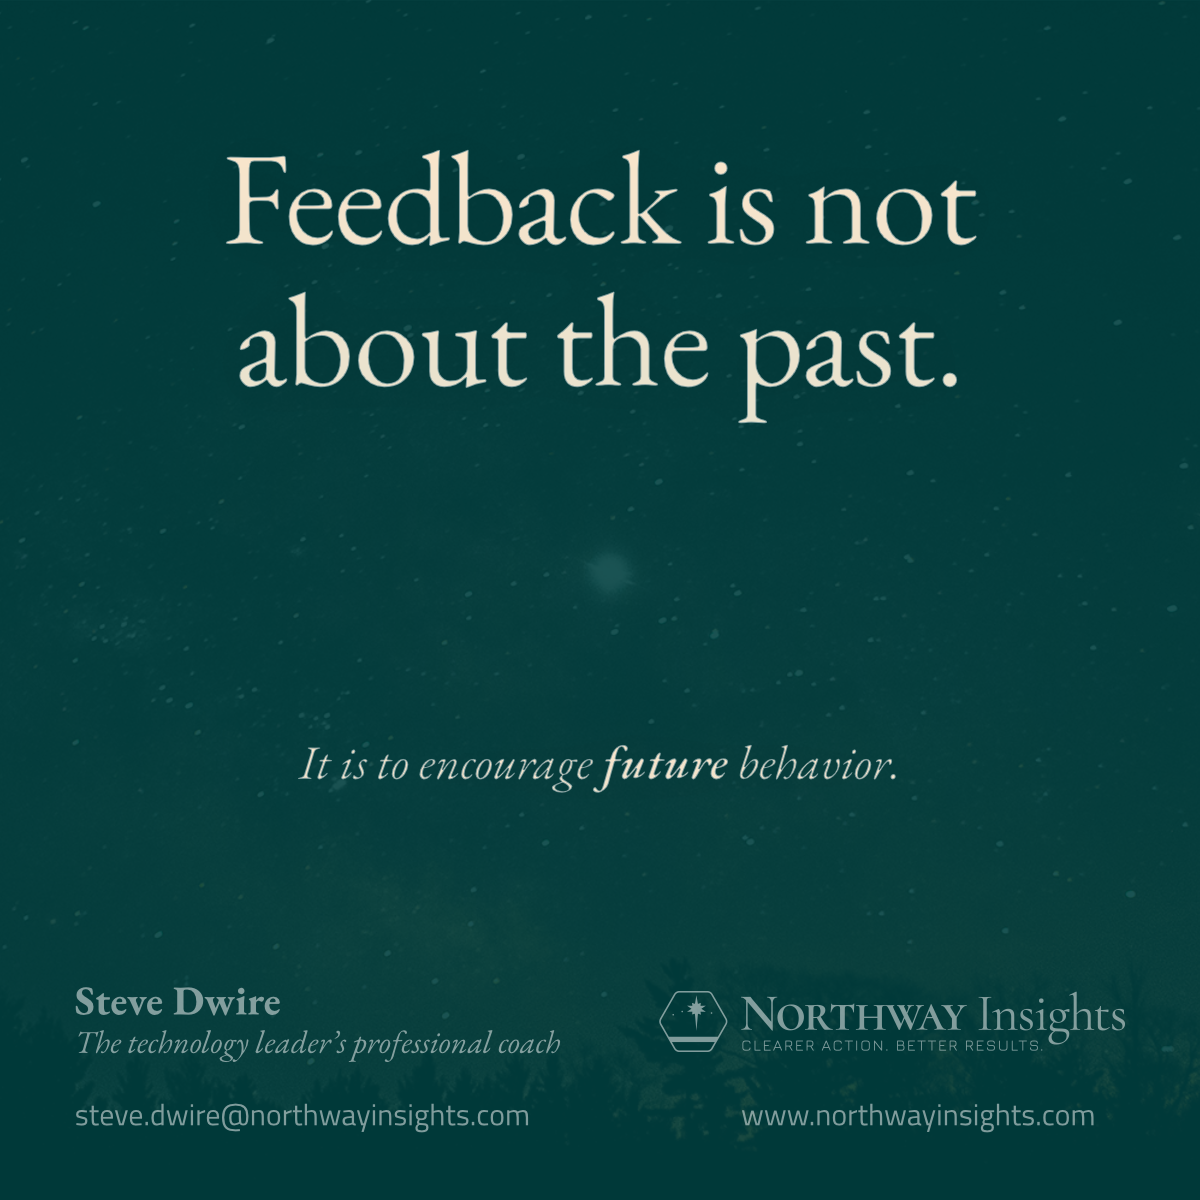 Feedback is not about the past. (It is encouraging future behavior.)